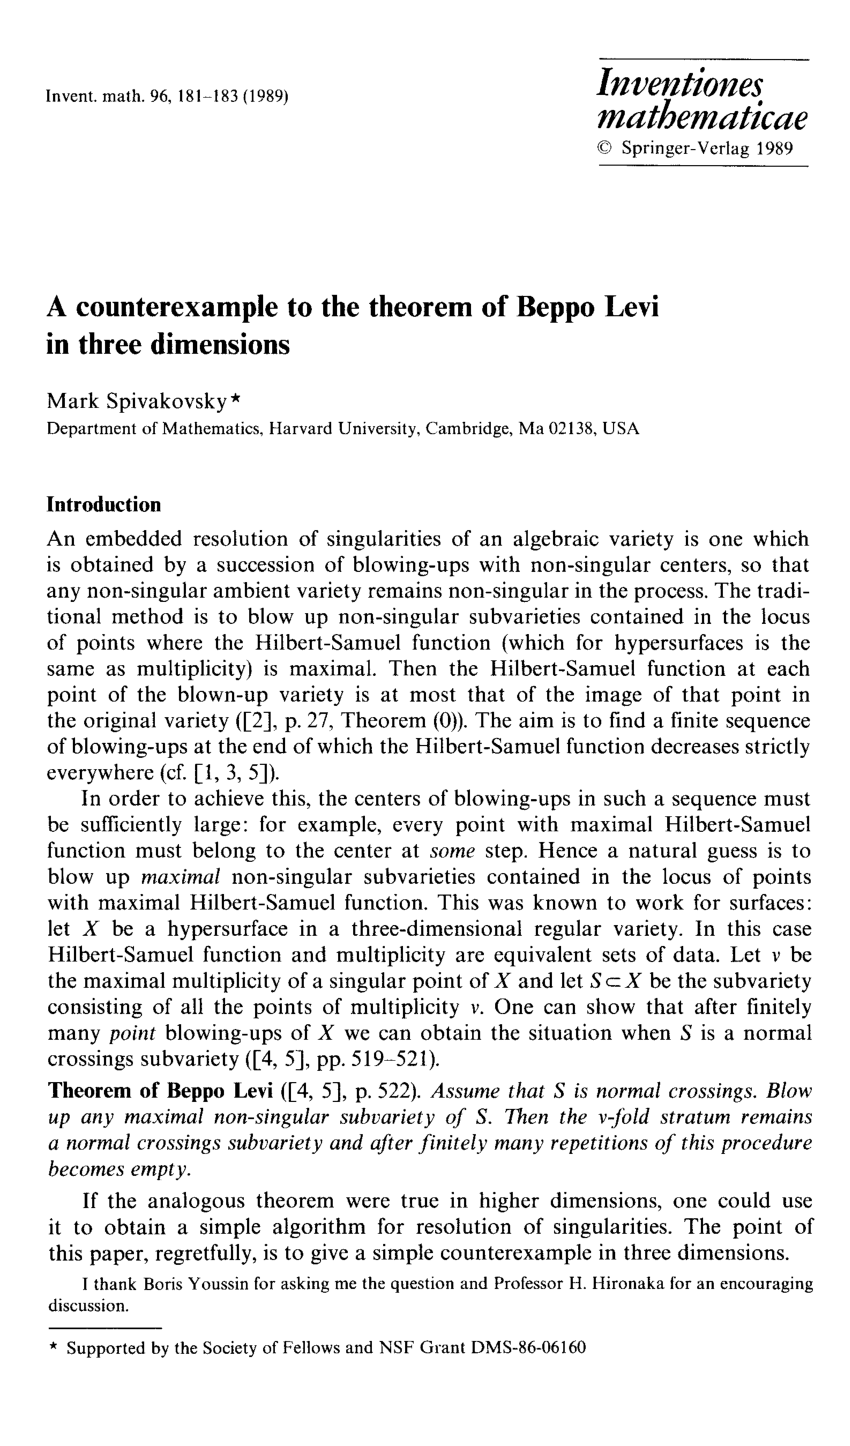 PDF) A counterexample to the theorem of Beppo Levi in three dimensions